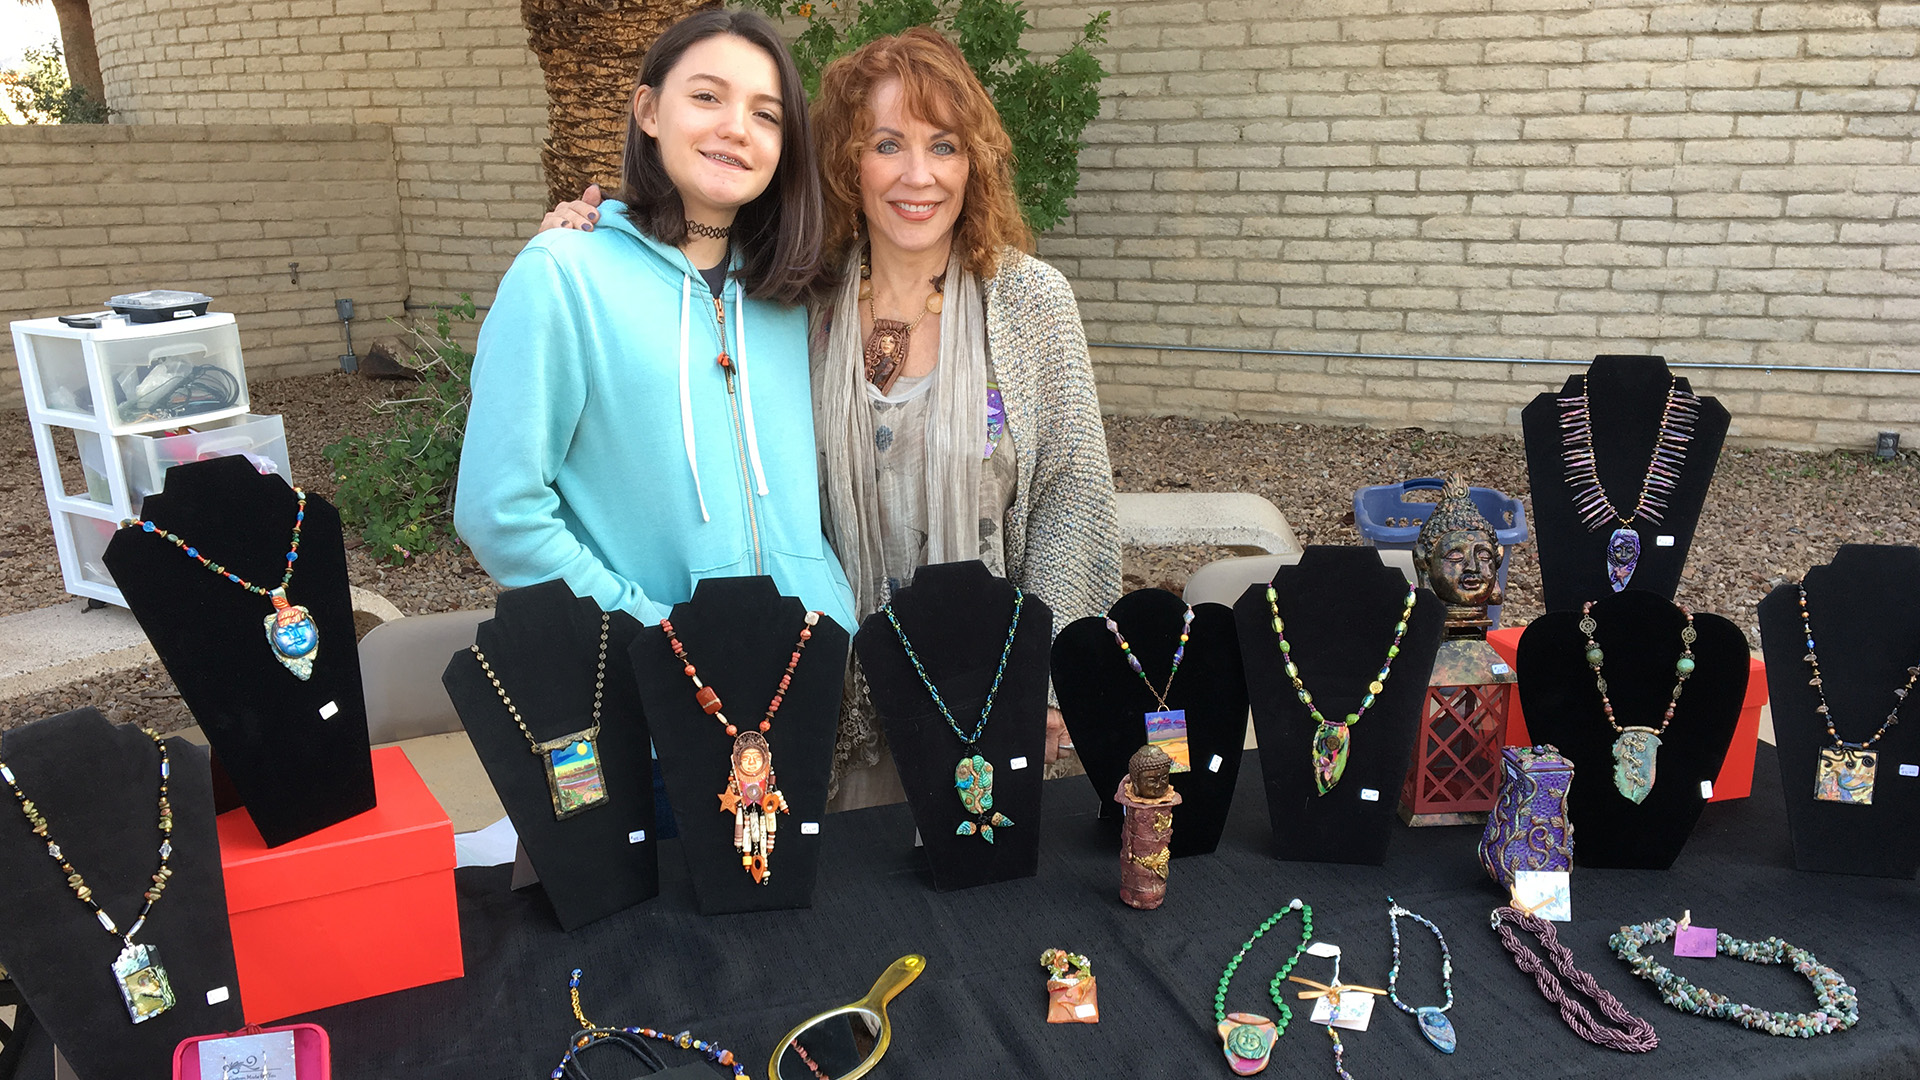 Smiling adult and teen at outside table with handmade jewelry - craft fair